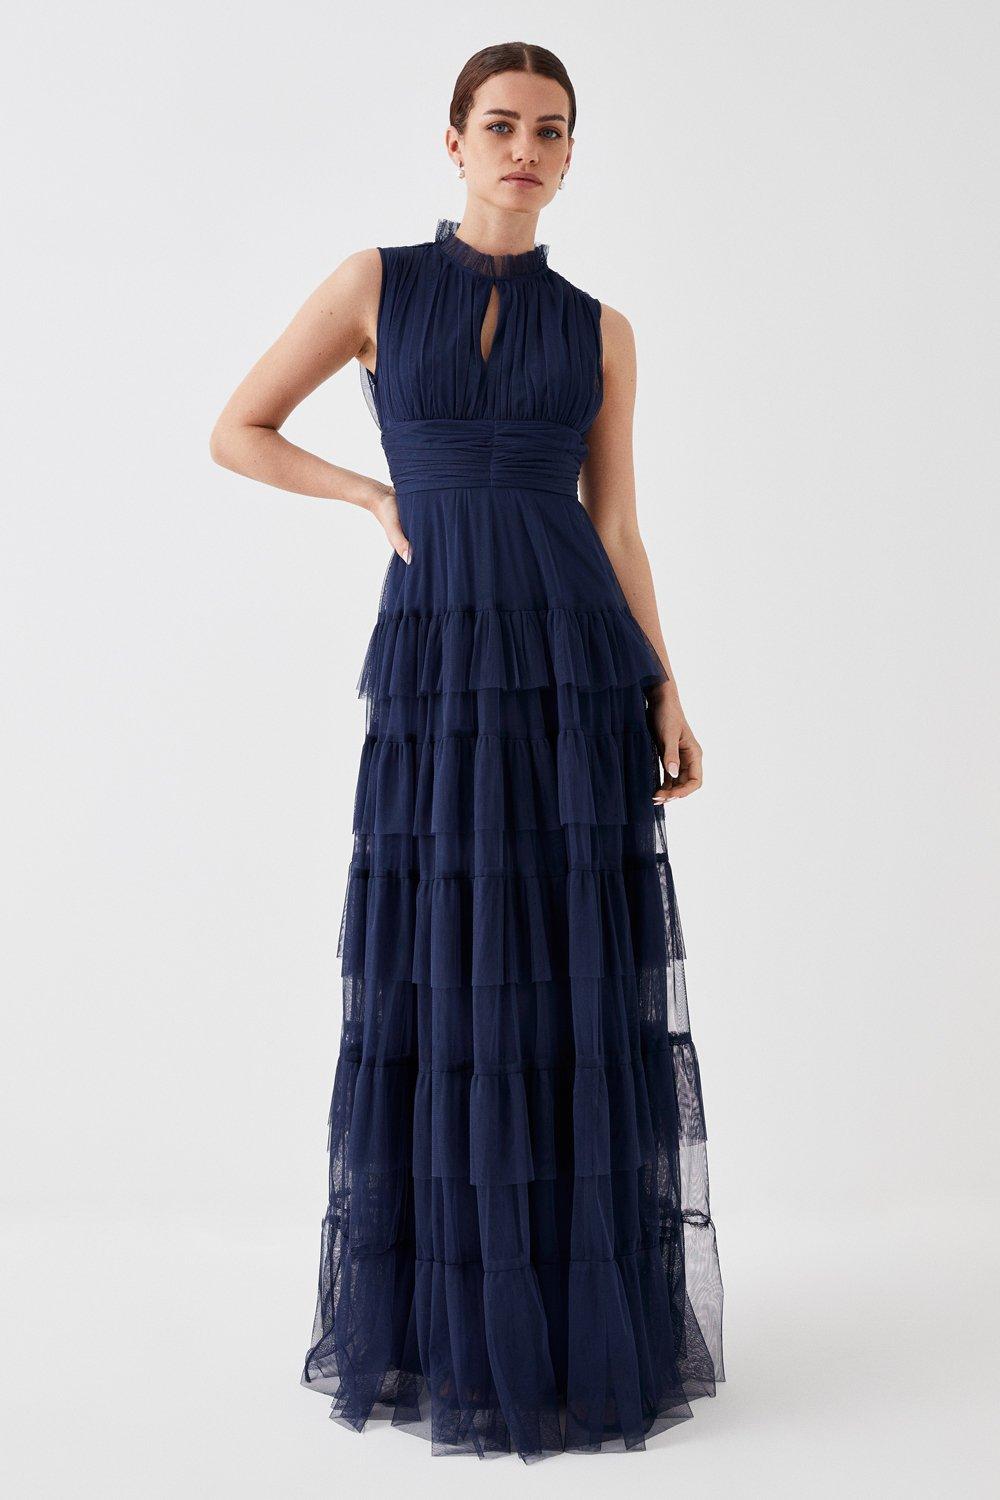 Petite Tulle Tiered Frill Sleeve Bridesmaids Maxi Dress - Navy